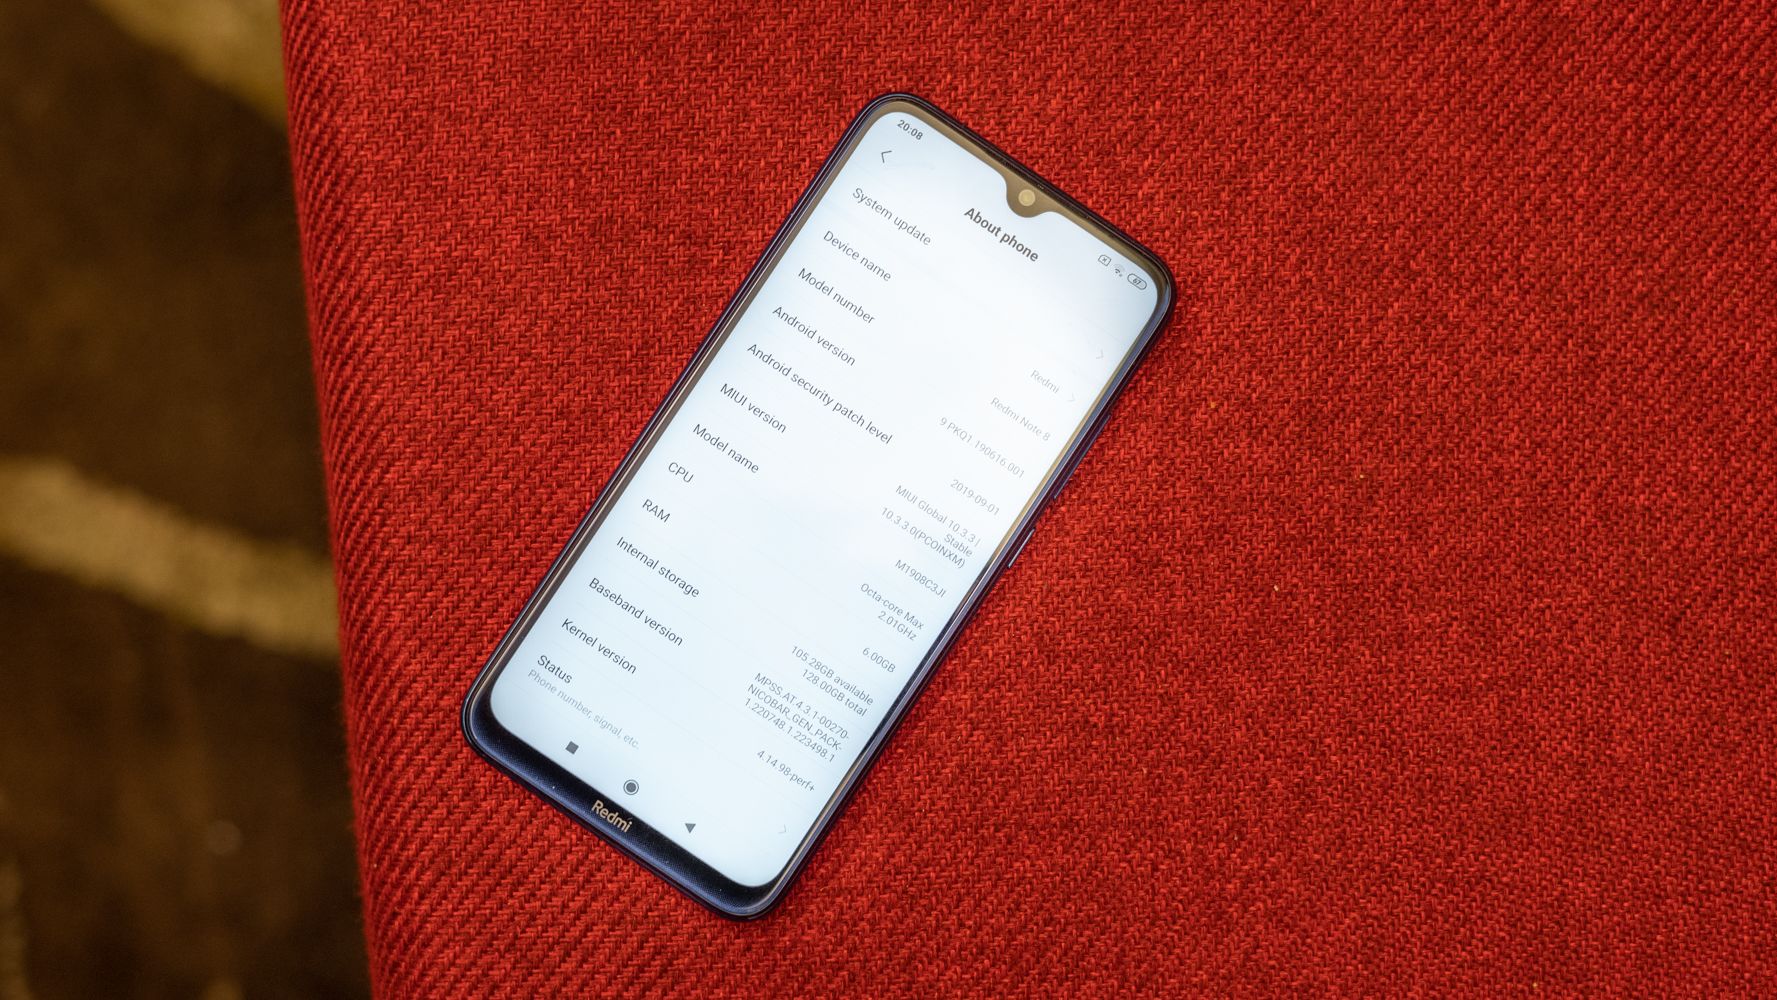 Redmi Note 8 lead image with about page